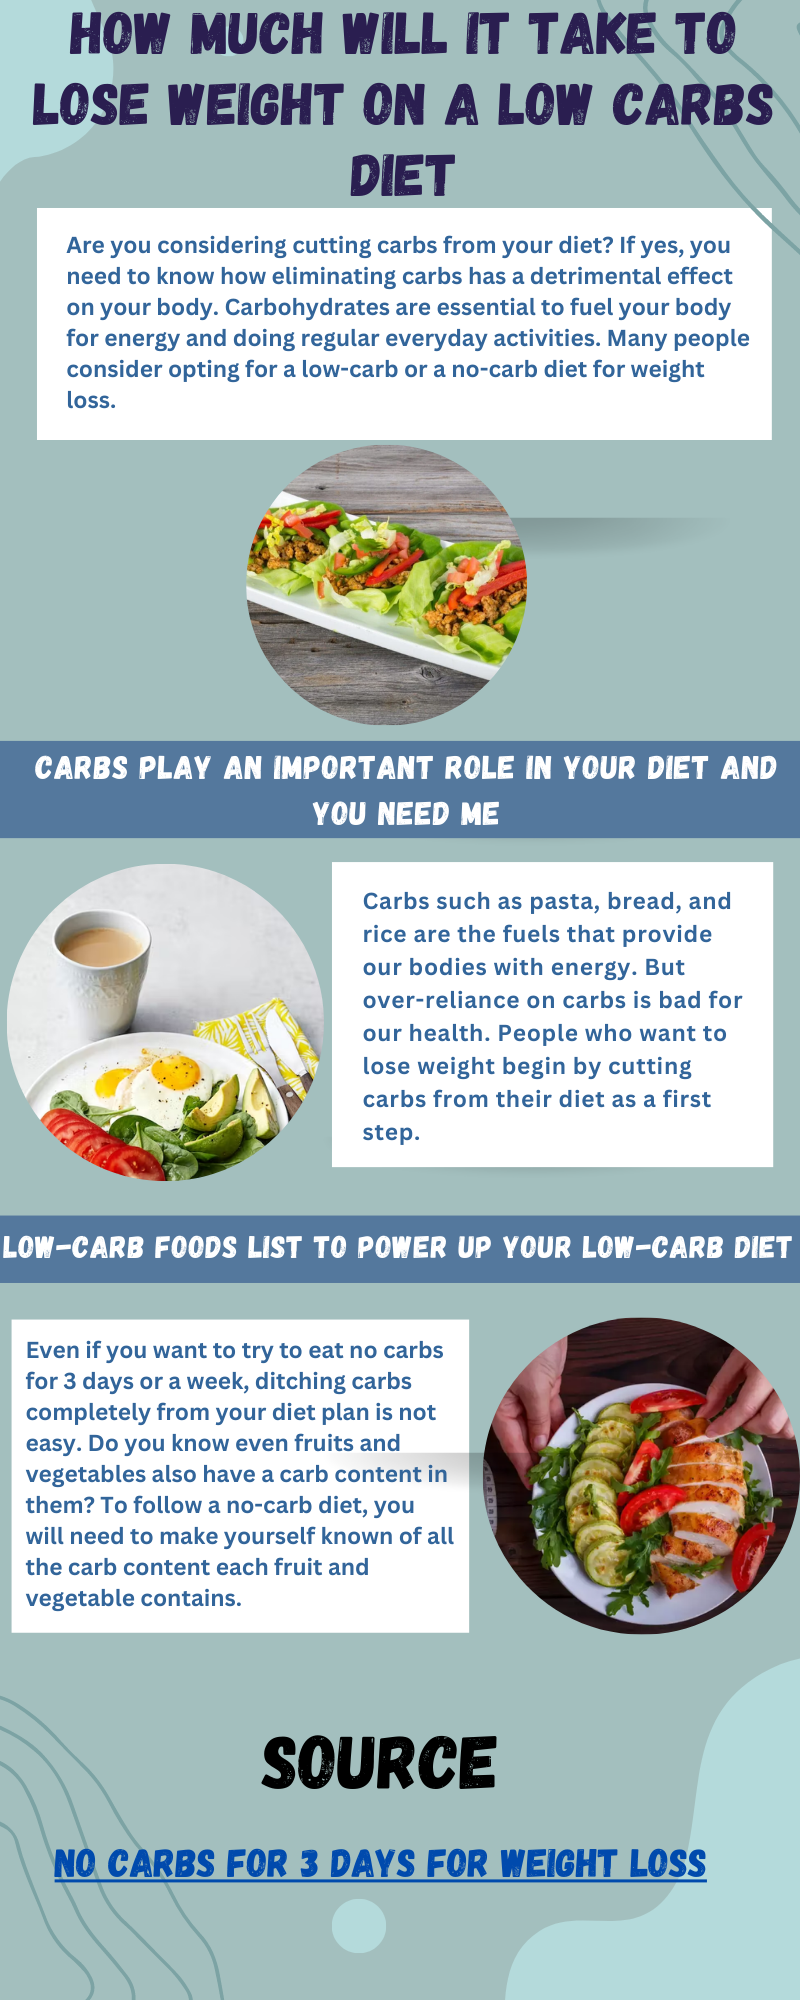 How Much Will It Take to Lose Weight on a Low Carbs Diet